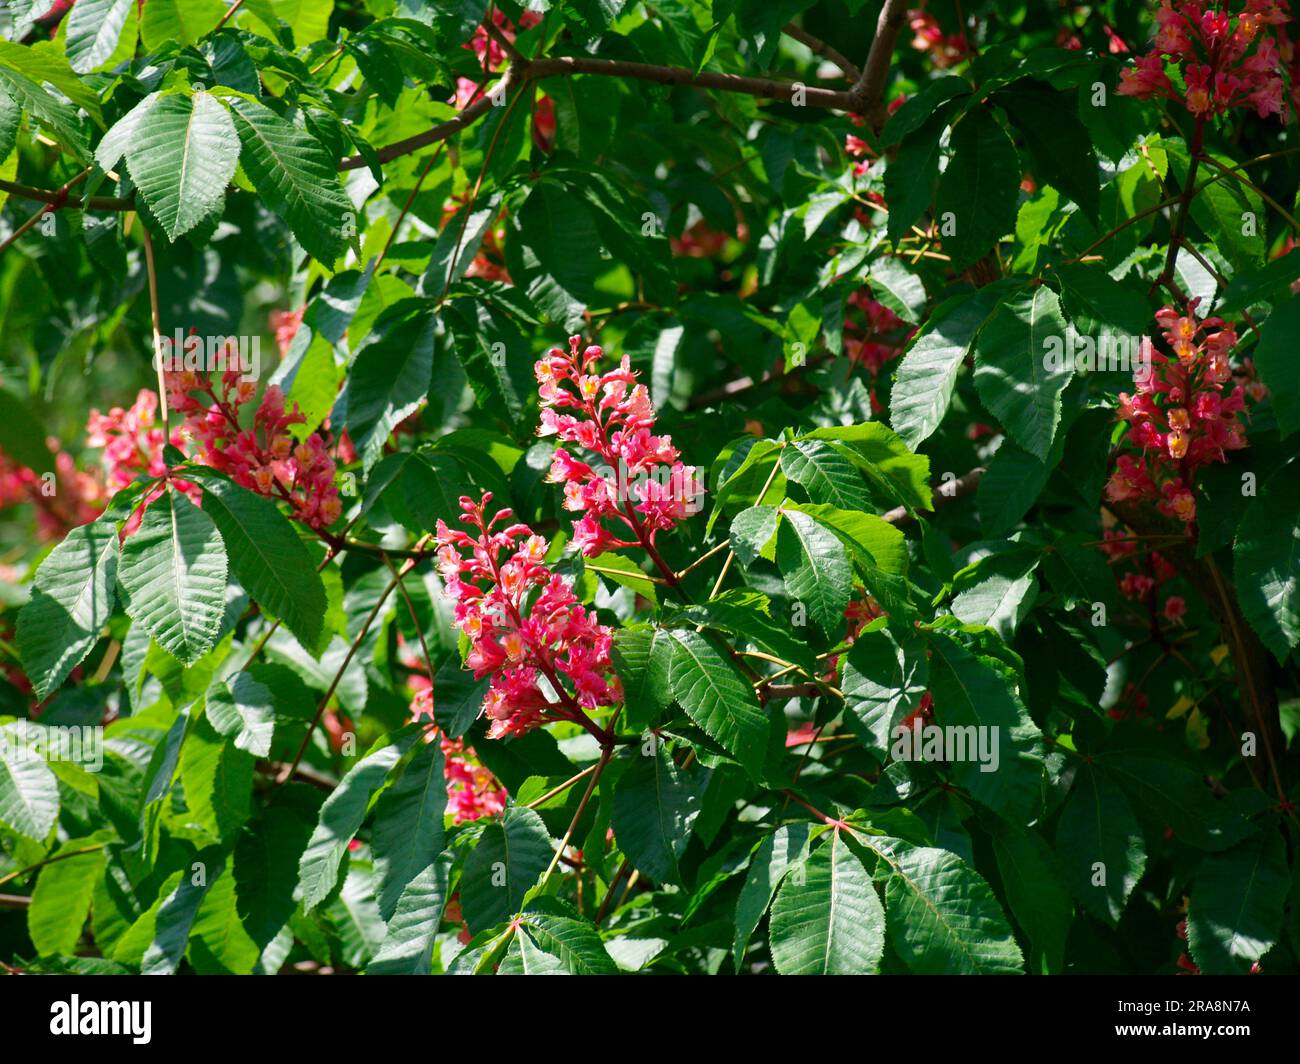 Red-flowered horse chestnut (Aesculus x carnea), Chestnut tree Stock Photo